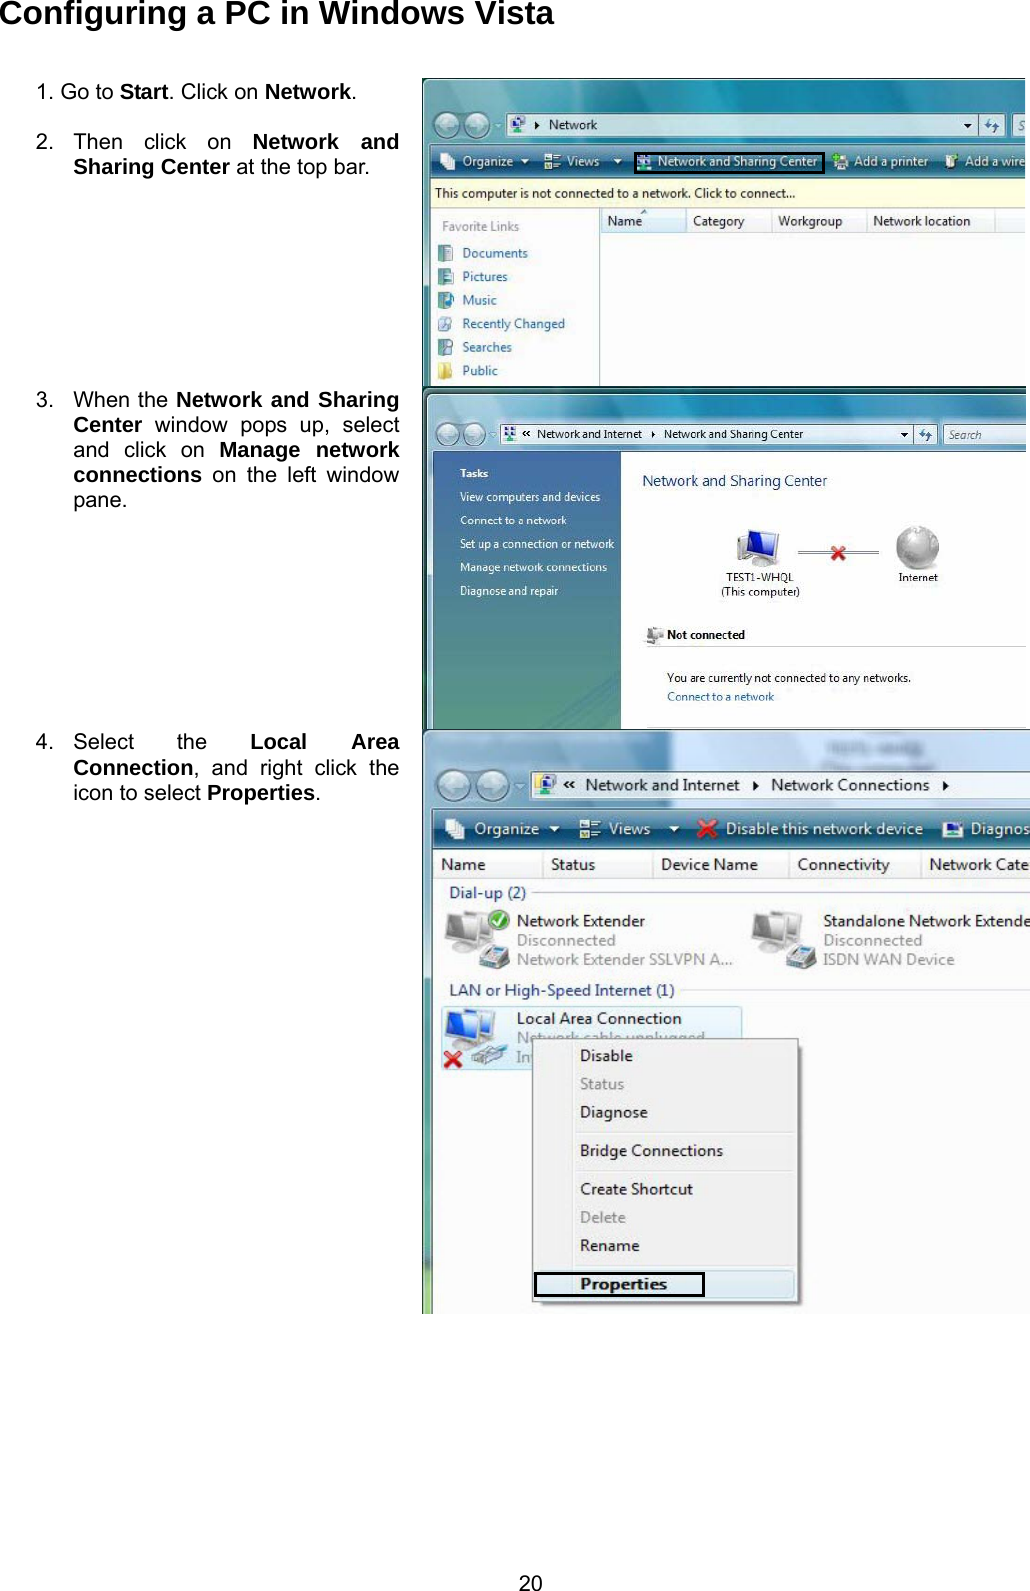  20  Configuring a PC in Windows Vista  1. Go to Start. Click on Network.  2. Then click on Network and Sharing Center at the top bar. 3. When the Network and Sharing Center window pops up, select and click on Manage network connections on the left window pane. 4. Select  the  Local Area Connection, and right click the icon to select Properties. 